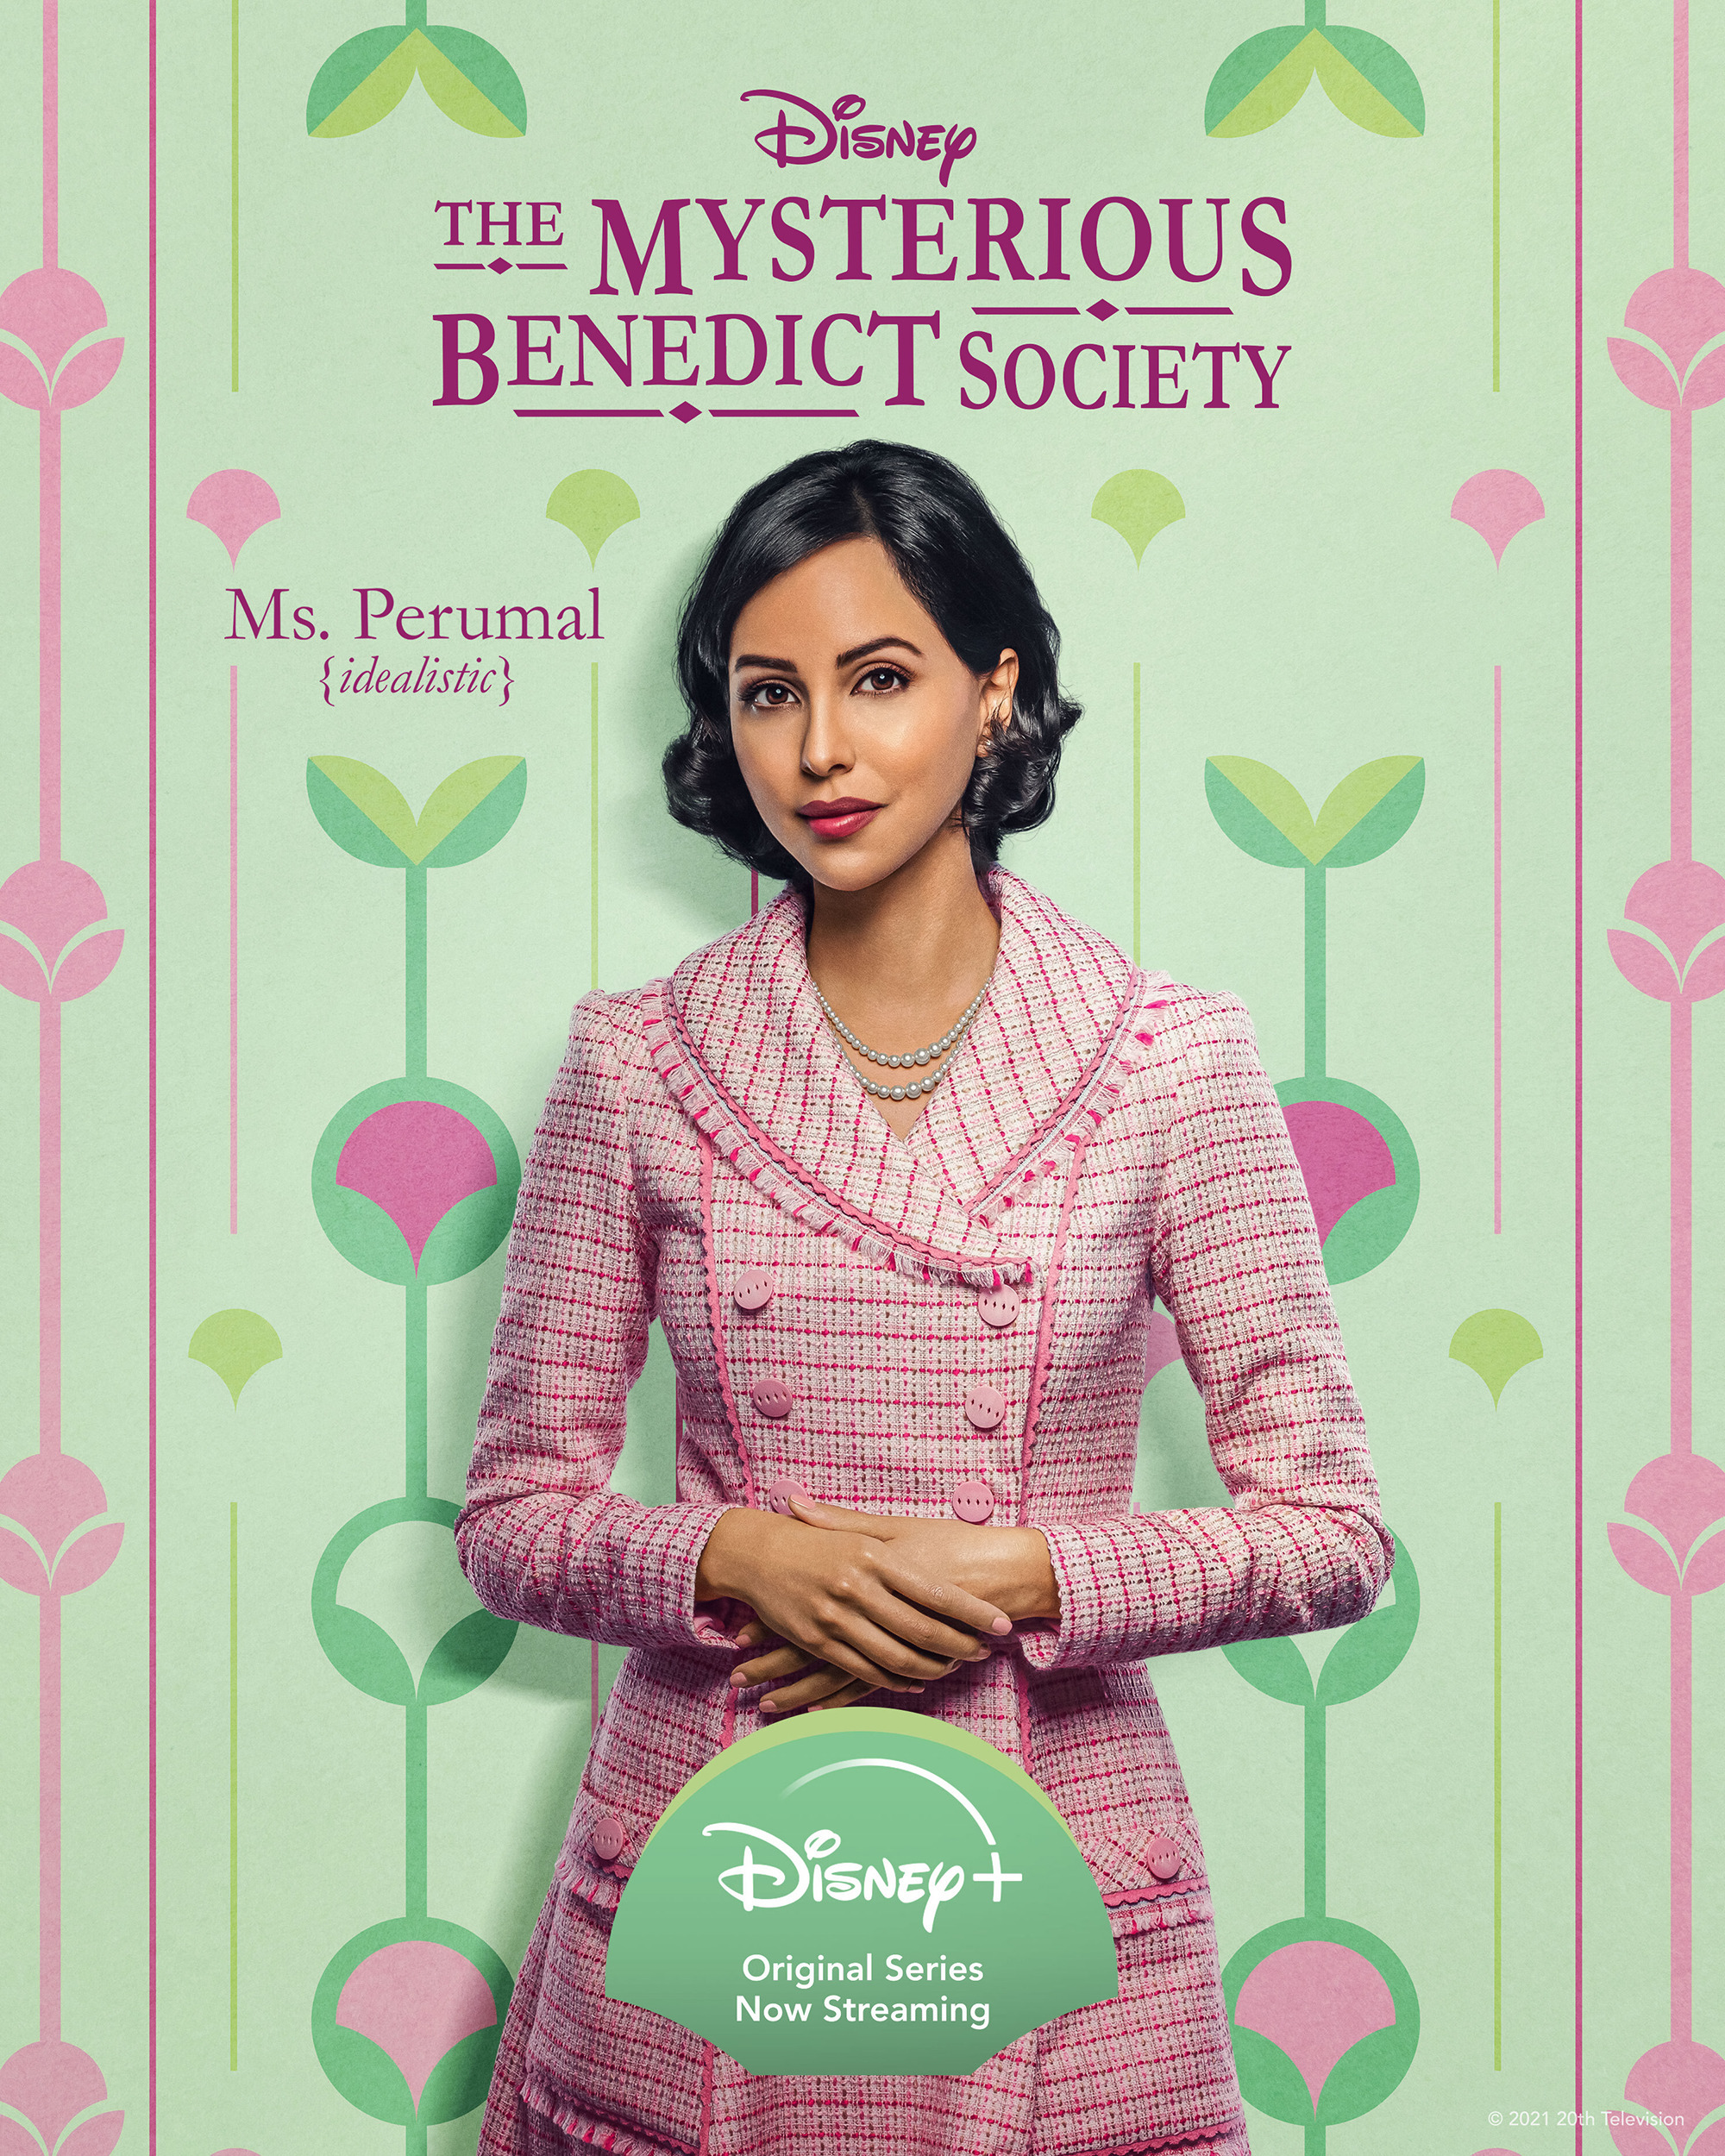 Mega Sized TV Poster Image for The Mysterious Benedict Society (#11 of 11)